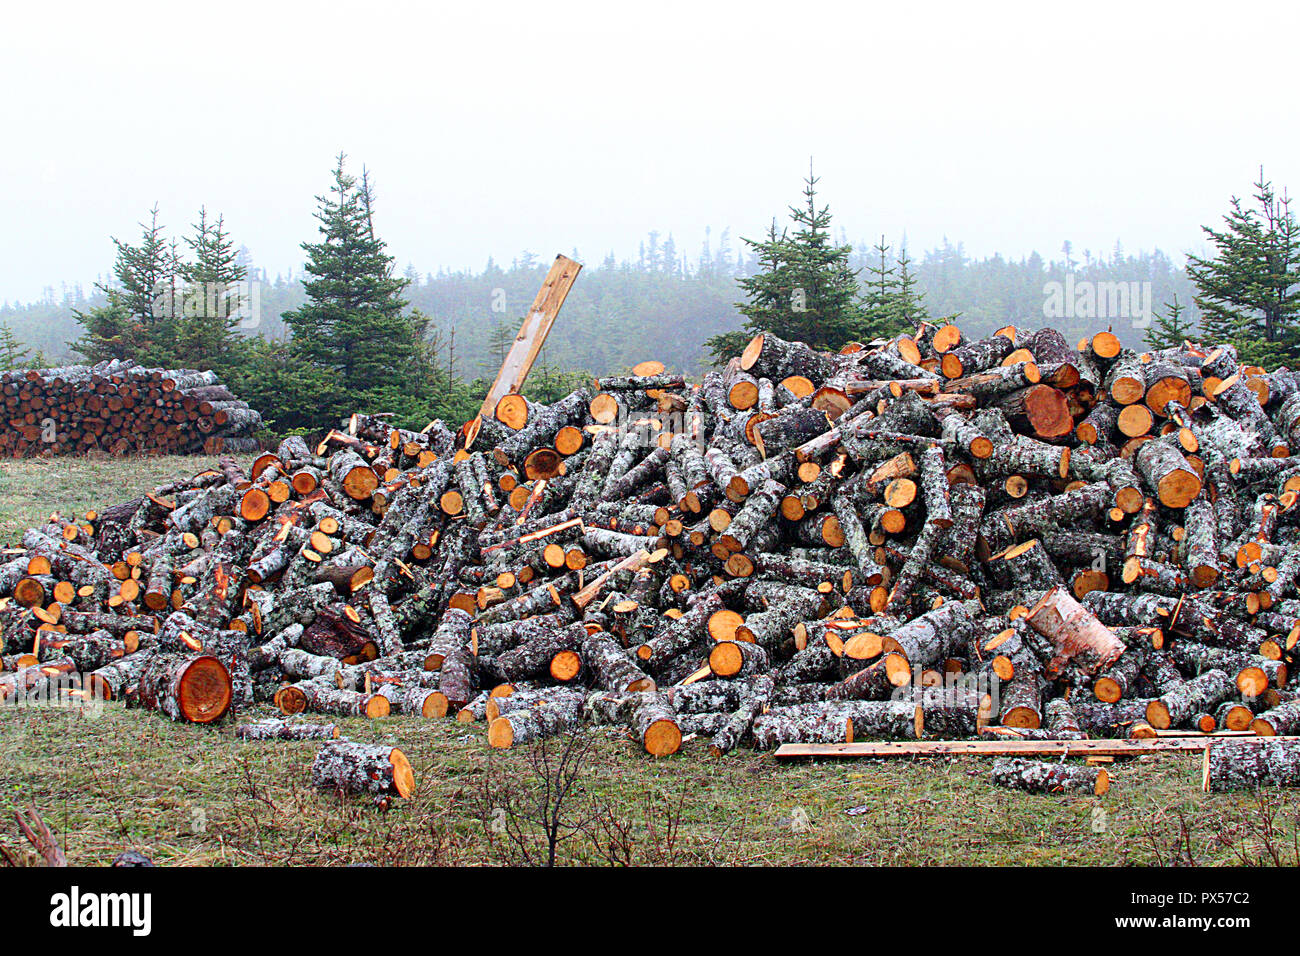 Newfoundland, Canada, roadside firewood pile.  Many people harvest wood to heat their homes and along the roadside are piles of chopped wood. Stock Photo